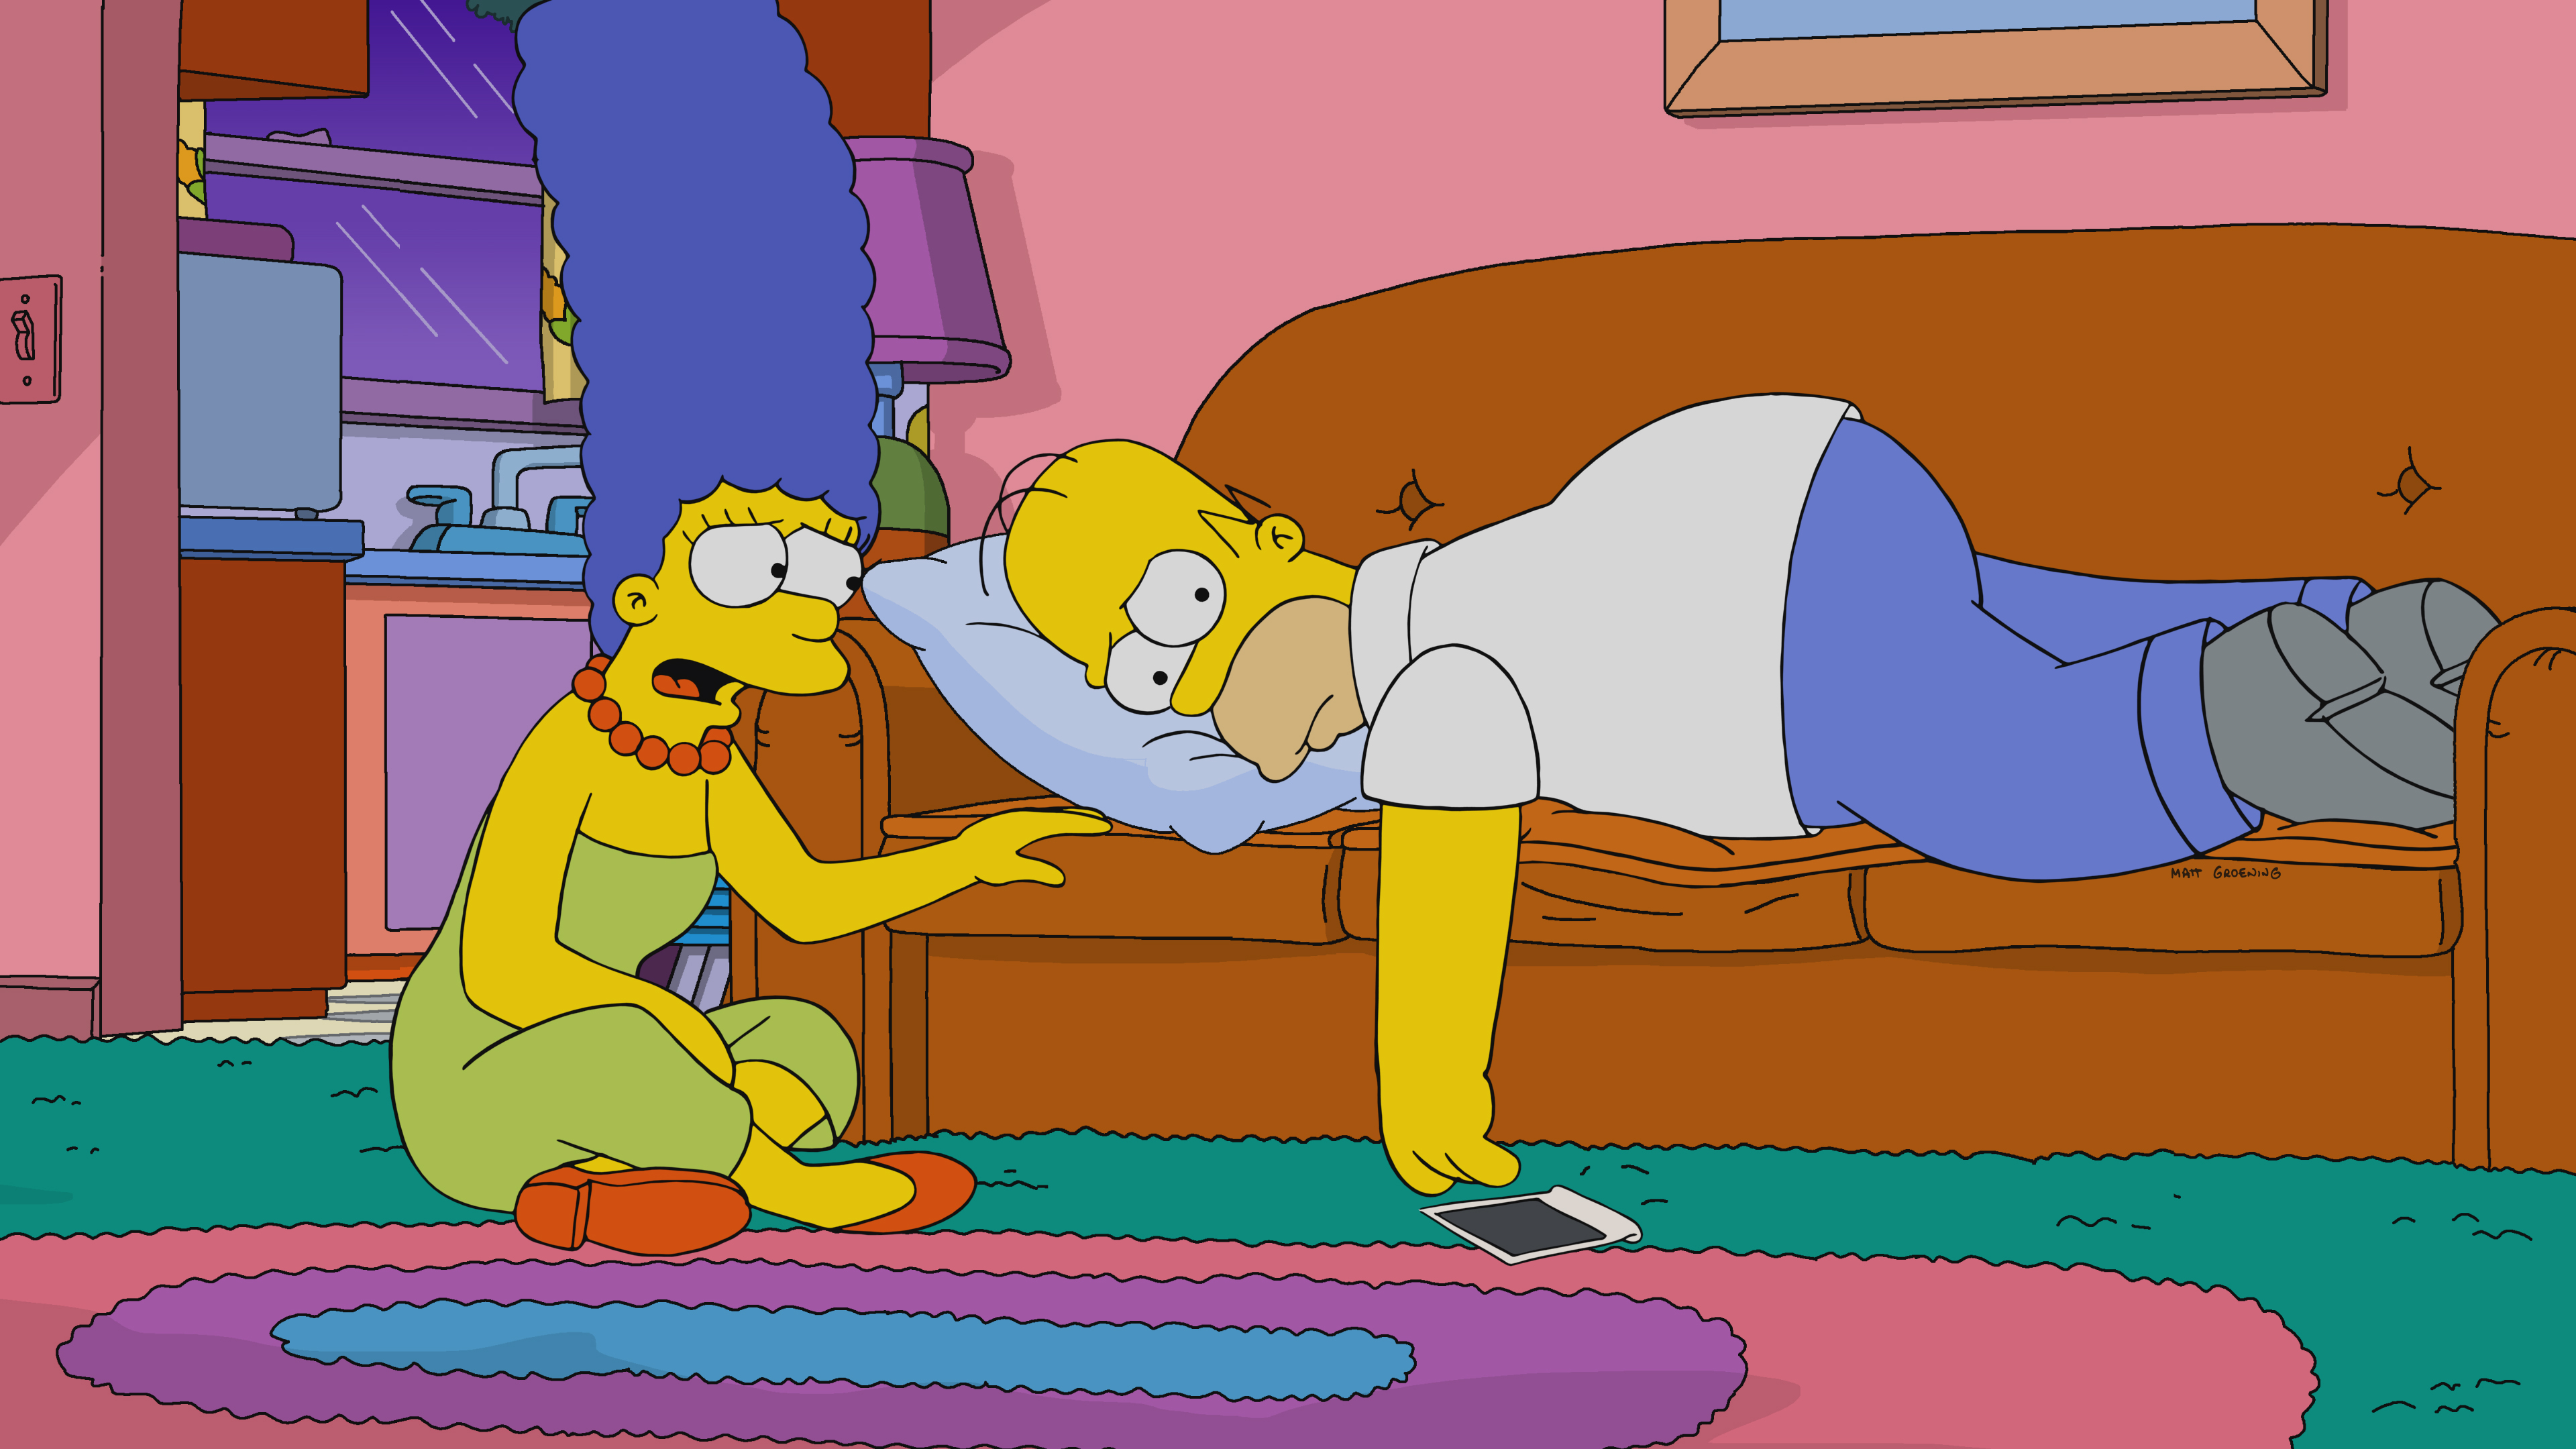 The Simpsons: Marge and Homer in the living room